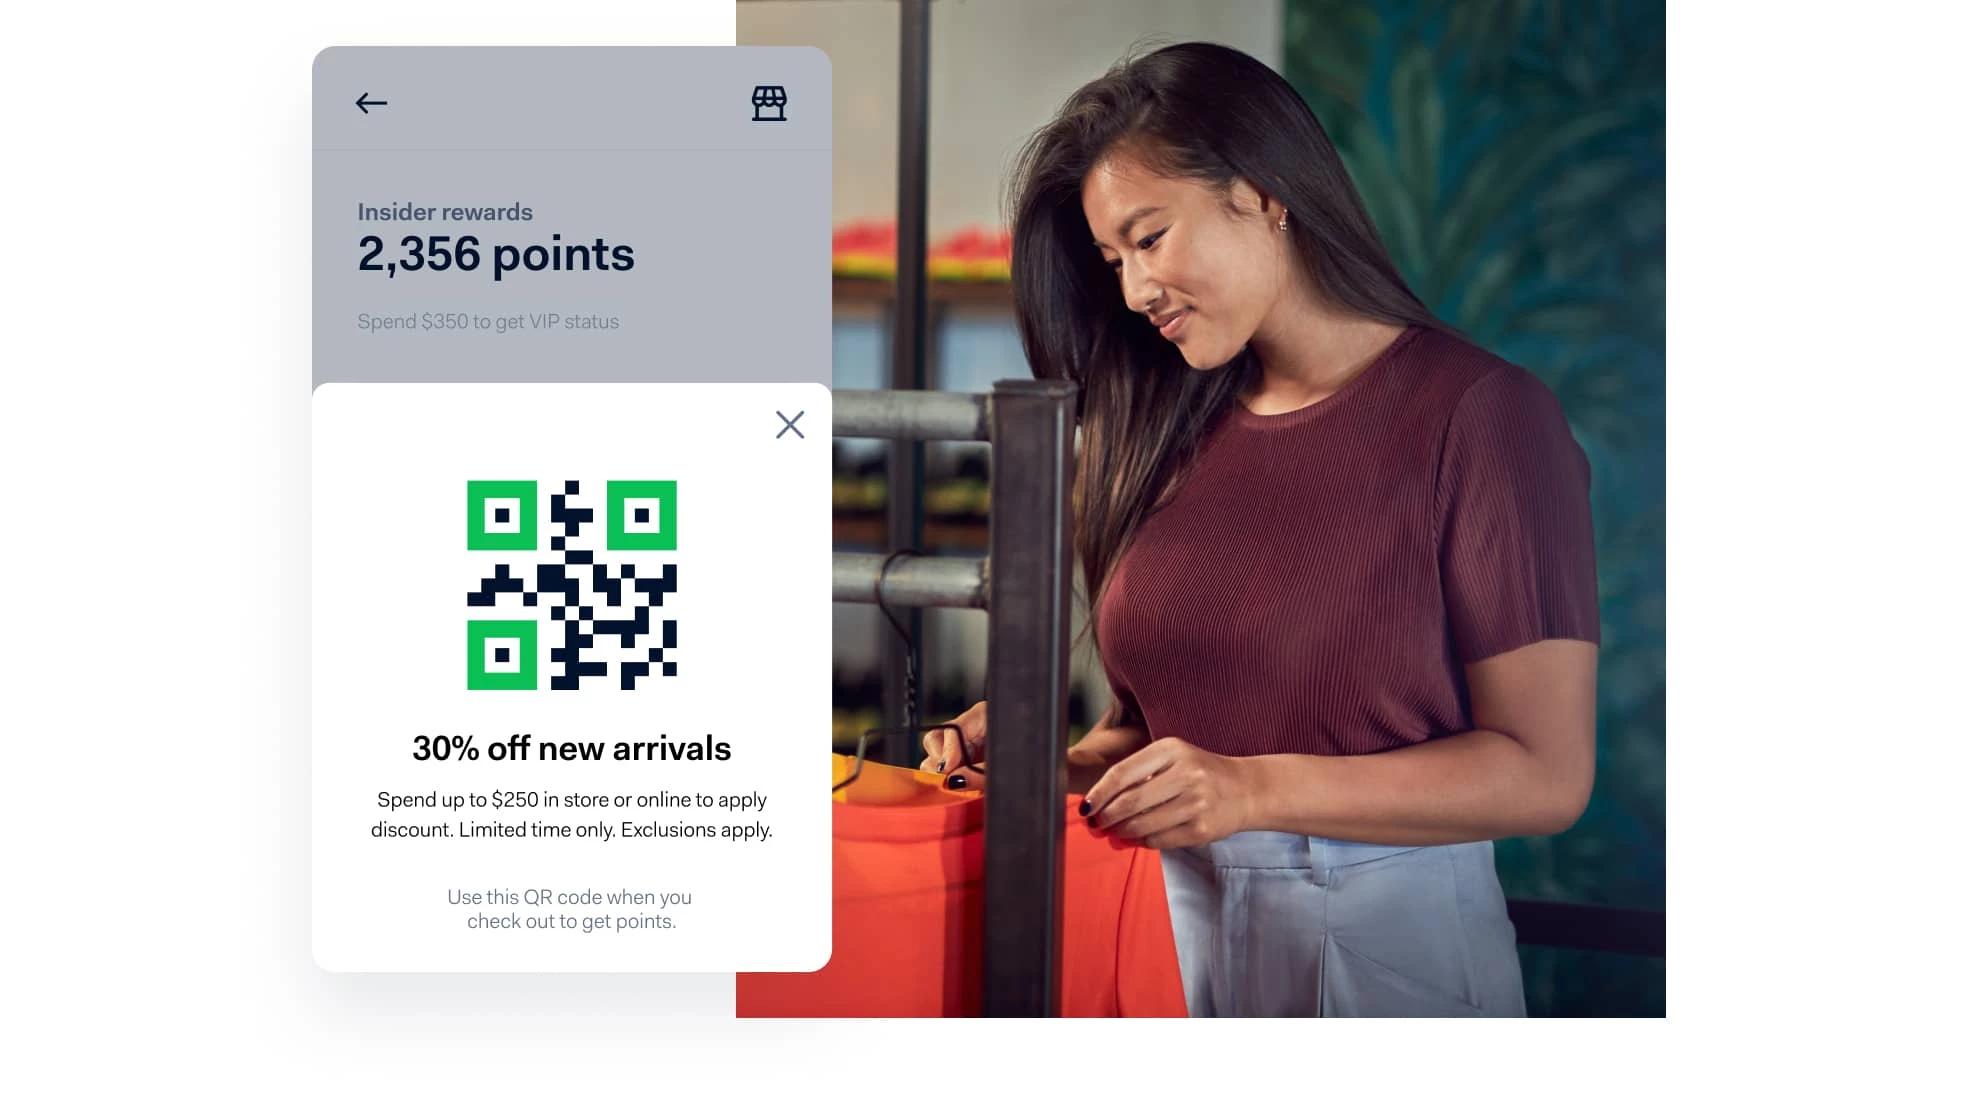 A phone screen offering a QR code payment coupon through a loyalty app